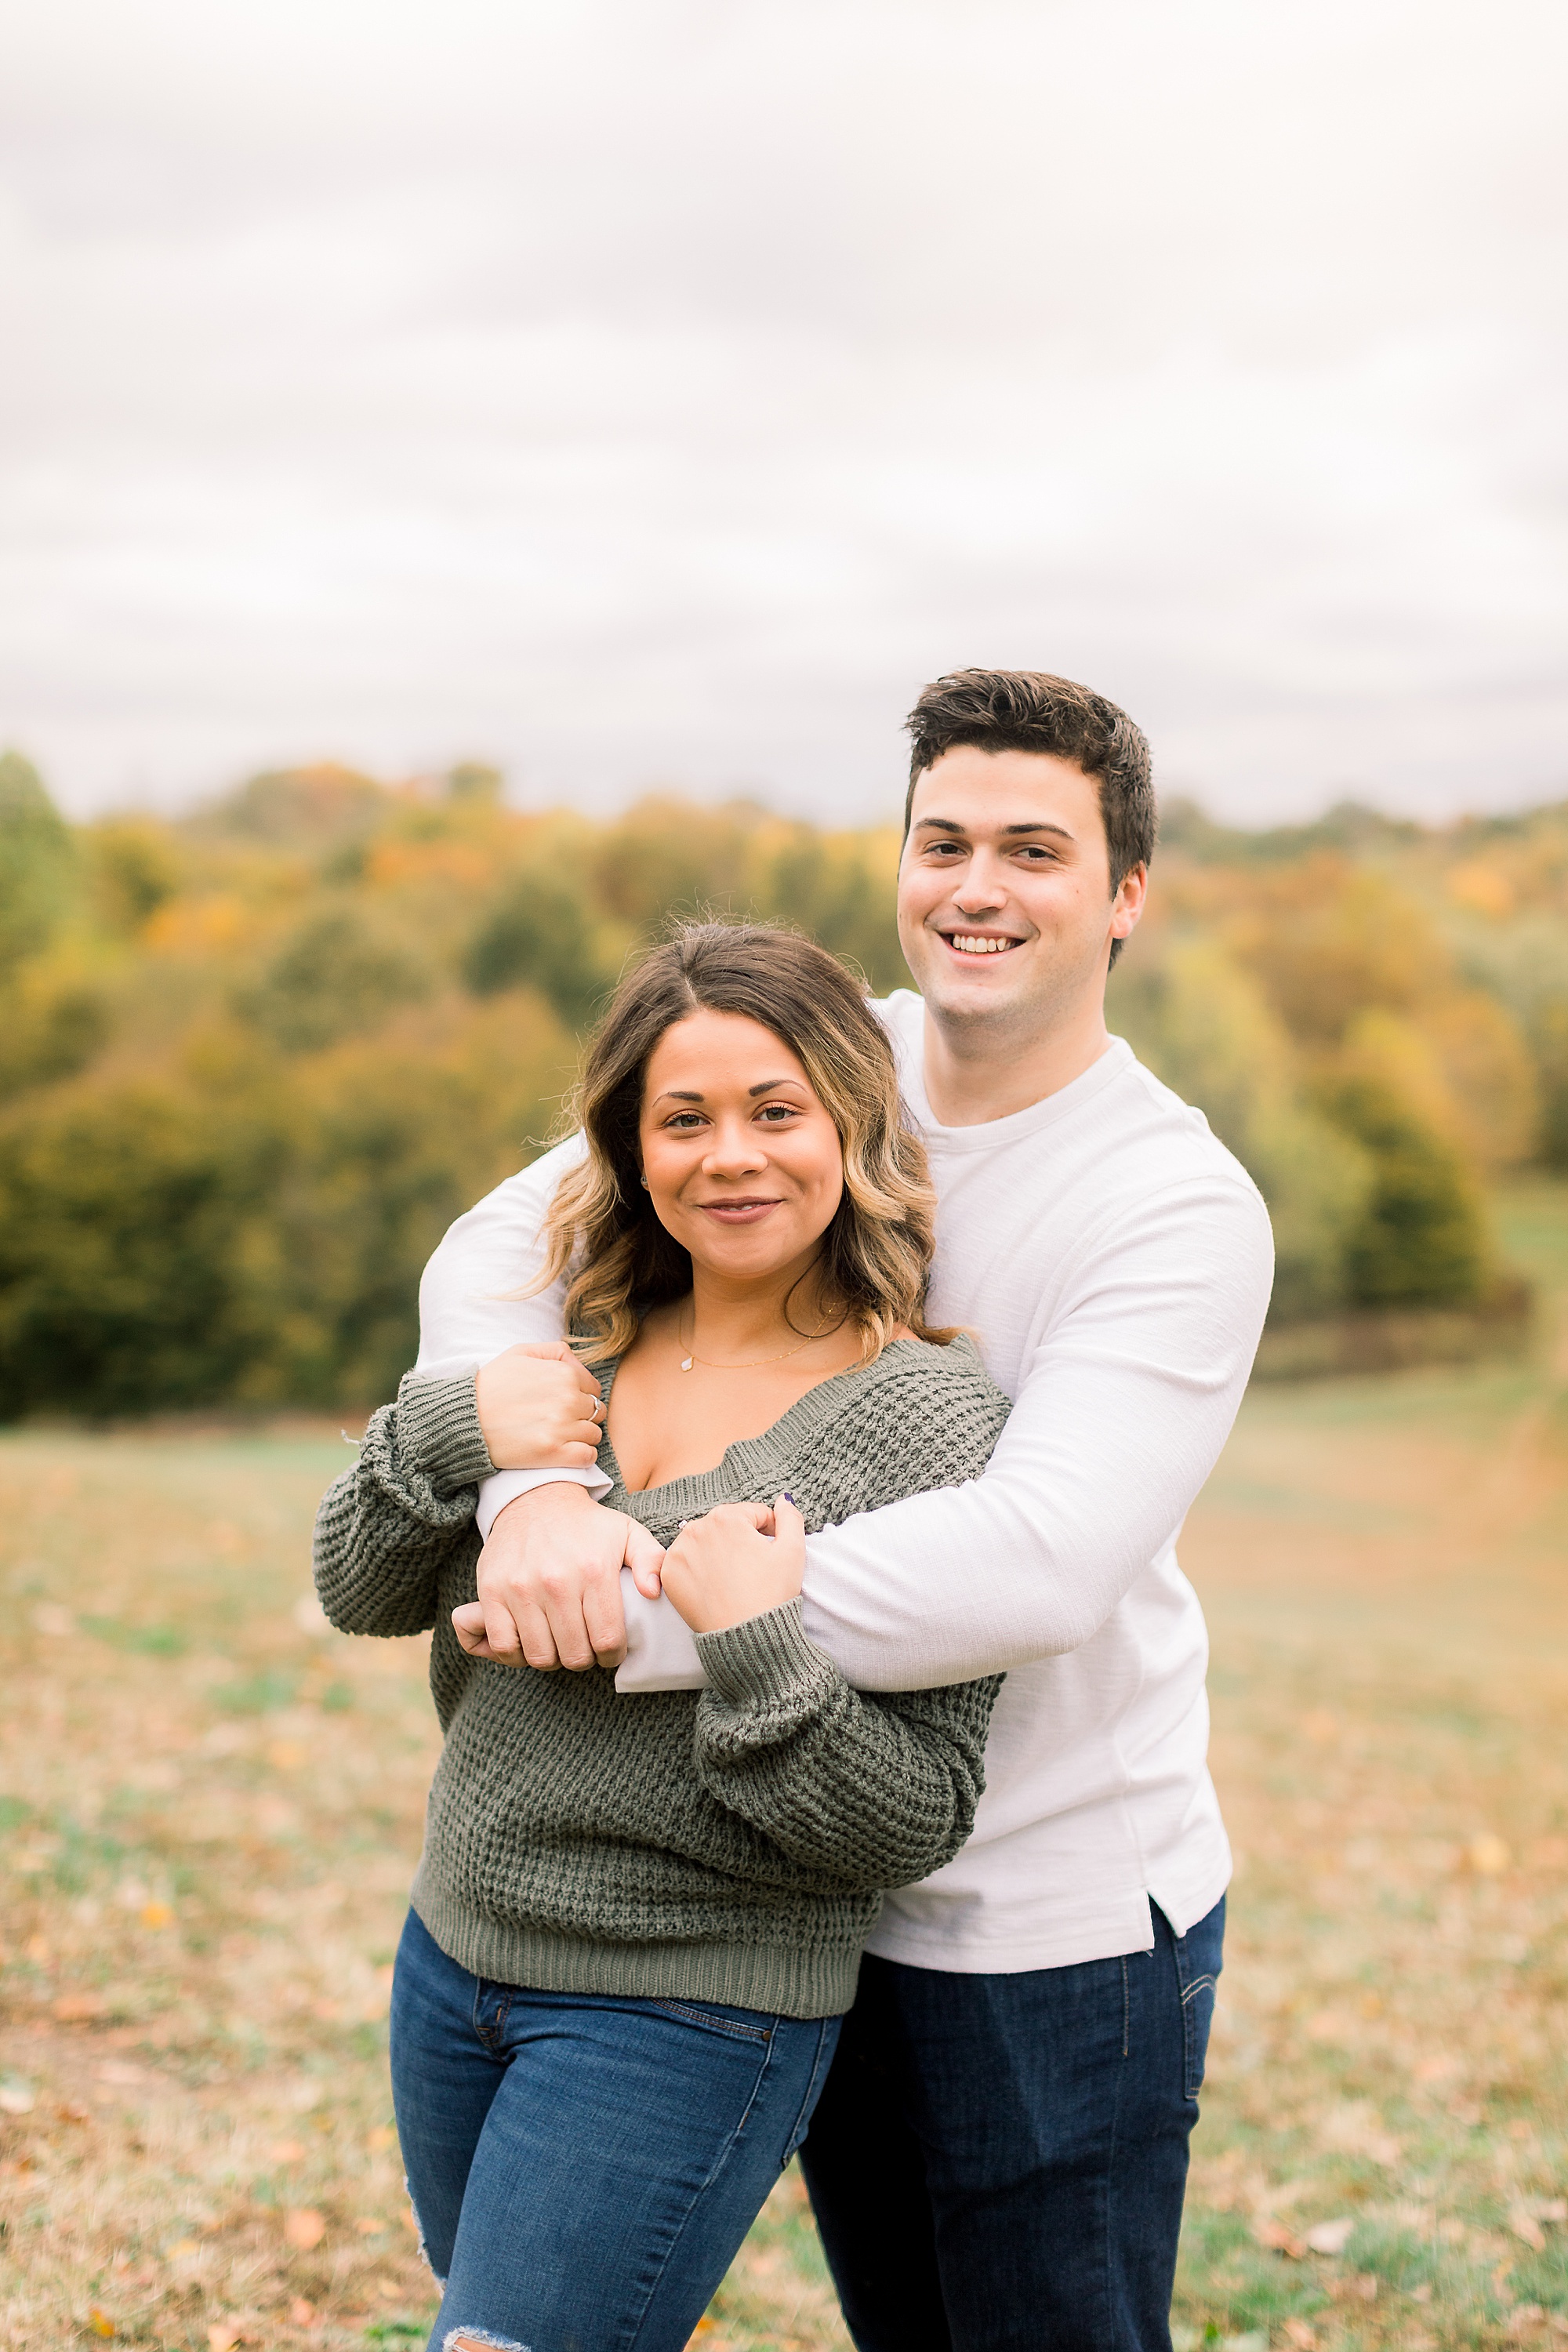 engagement session at a colorful park in fall 